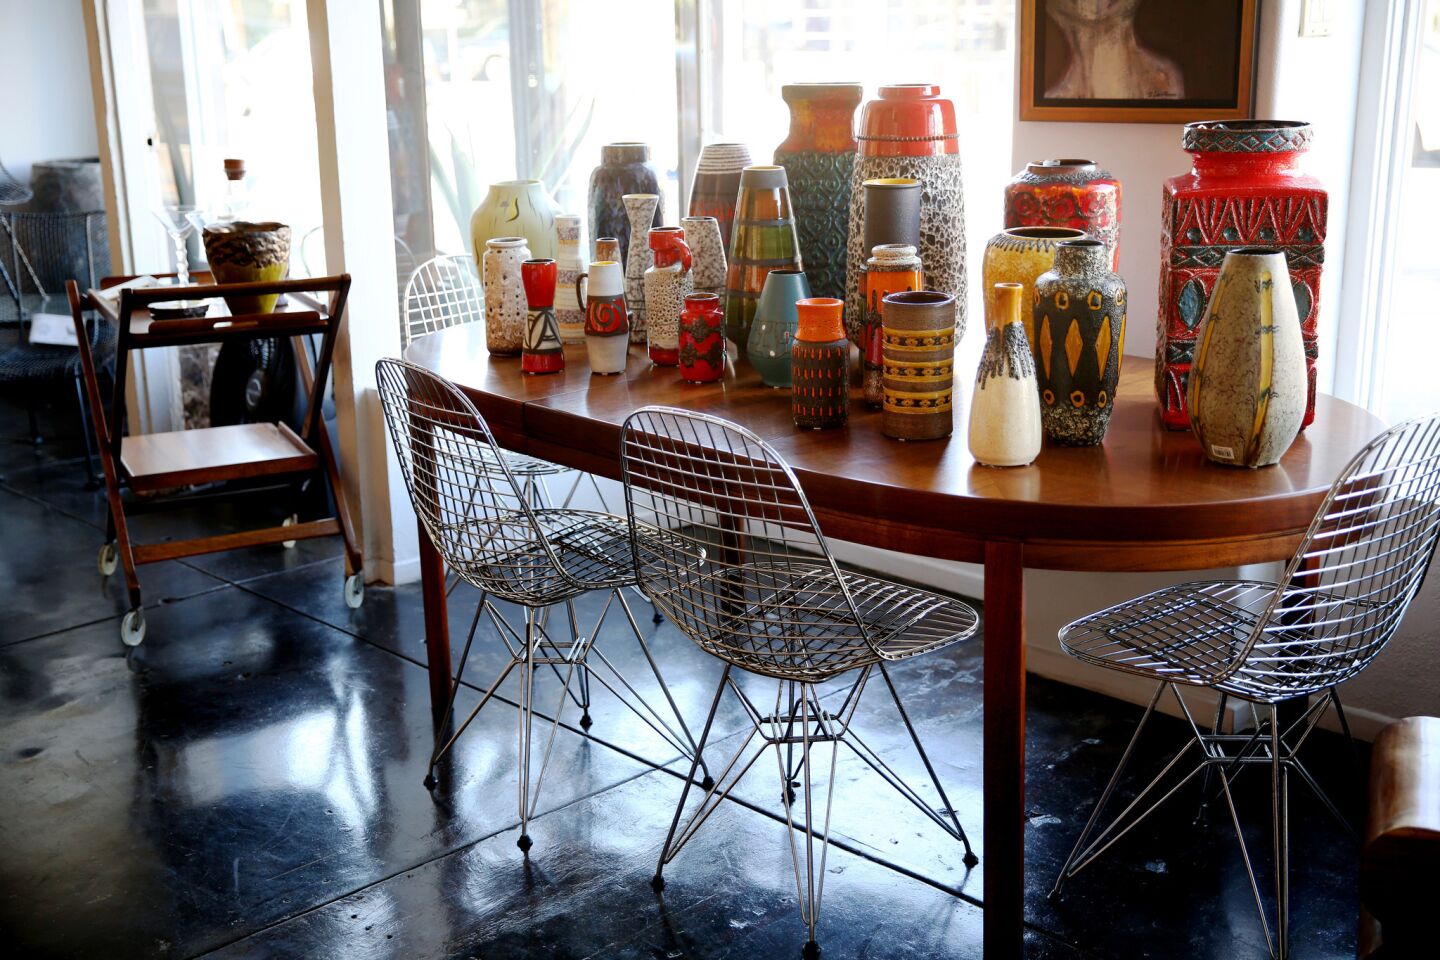 West German pottery decorates a tabletop at Trebor/Nevets in Long Beach. A set of four Eames Eiffel Tower chairs by Herman Miller sit around the table.